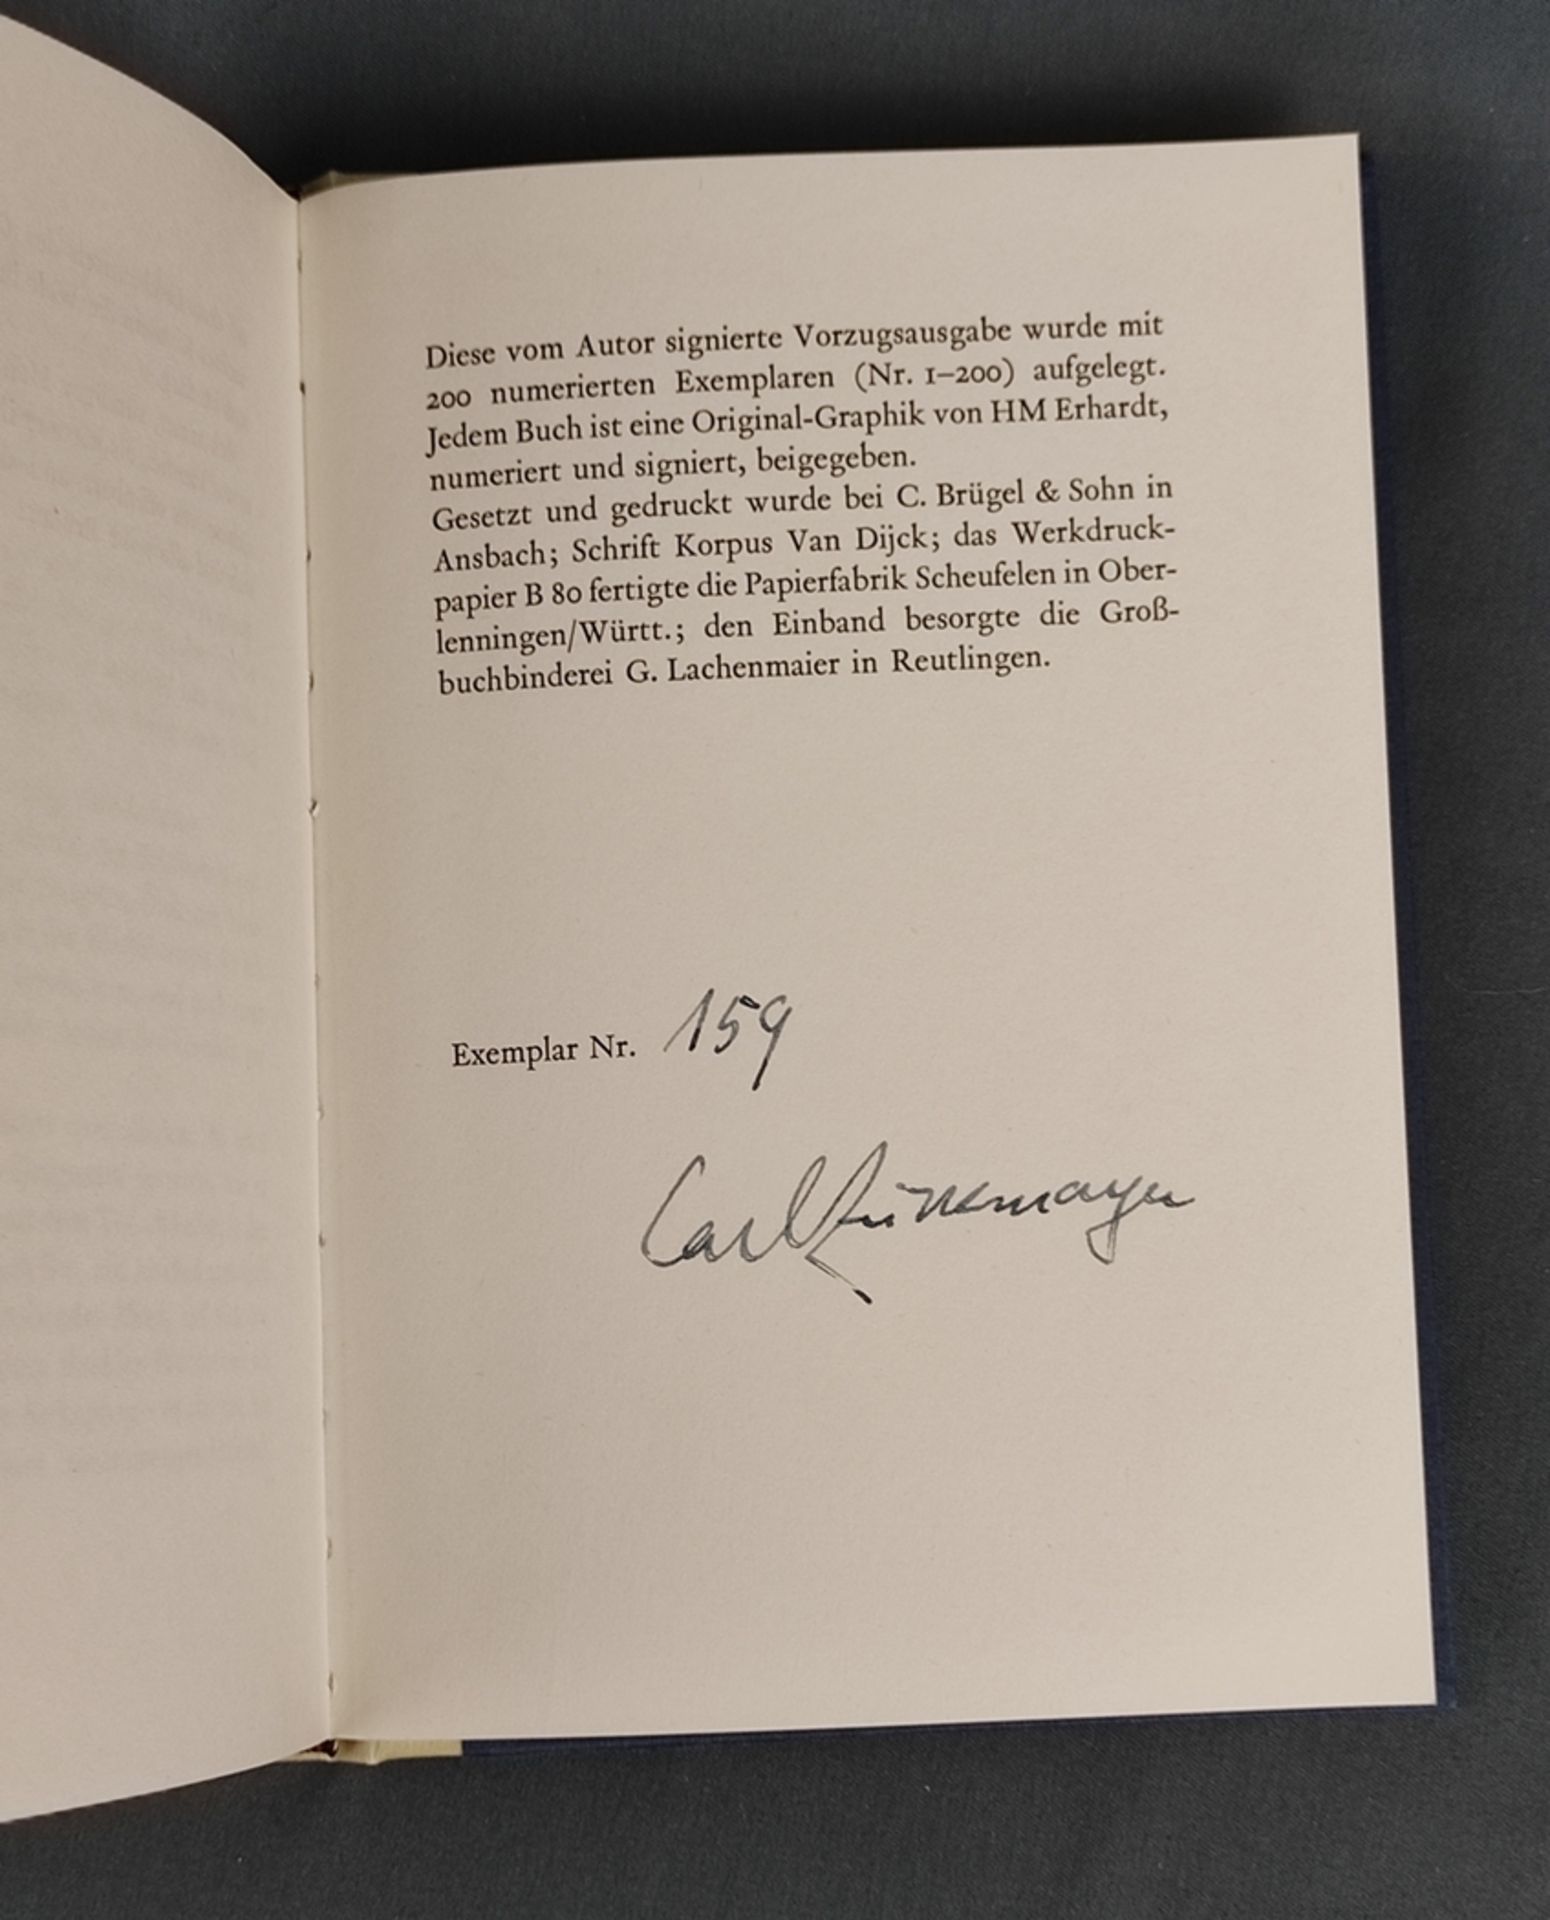 Zuckmayer, Carl "Die Fasnachtsbeichte", Ex. 159/200, signed by hand, 1971, 256 pages, 12 illustrati - Image 5 of 5